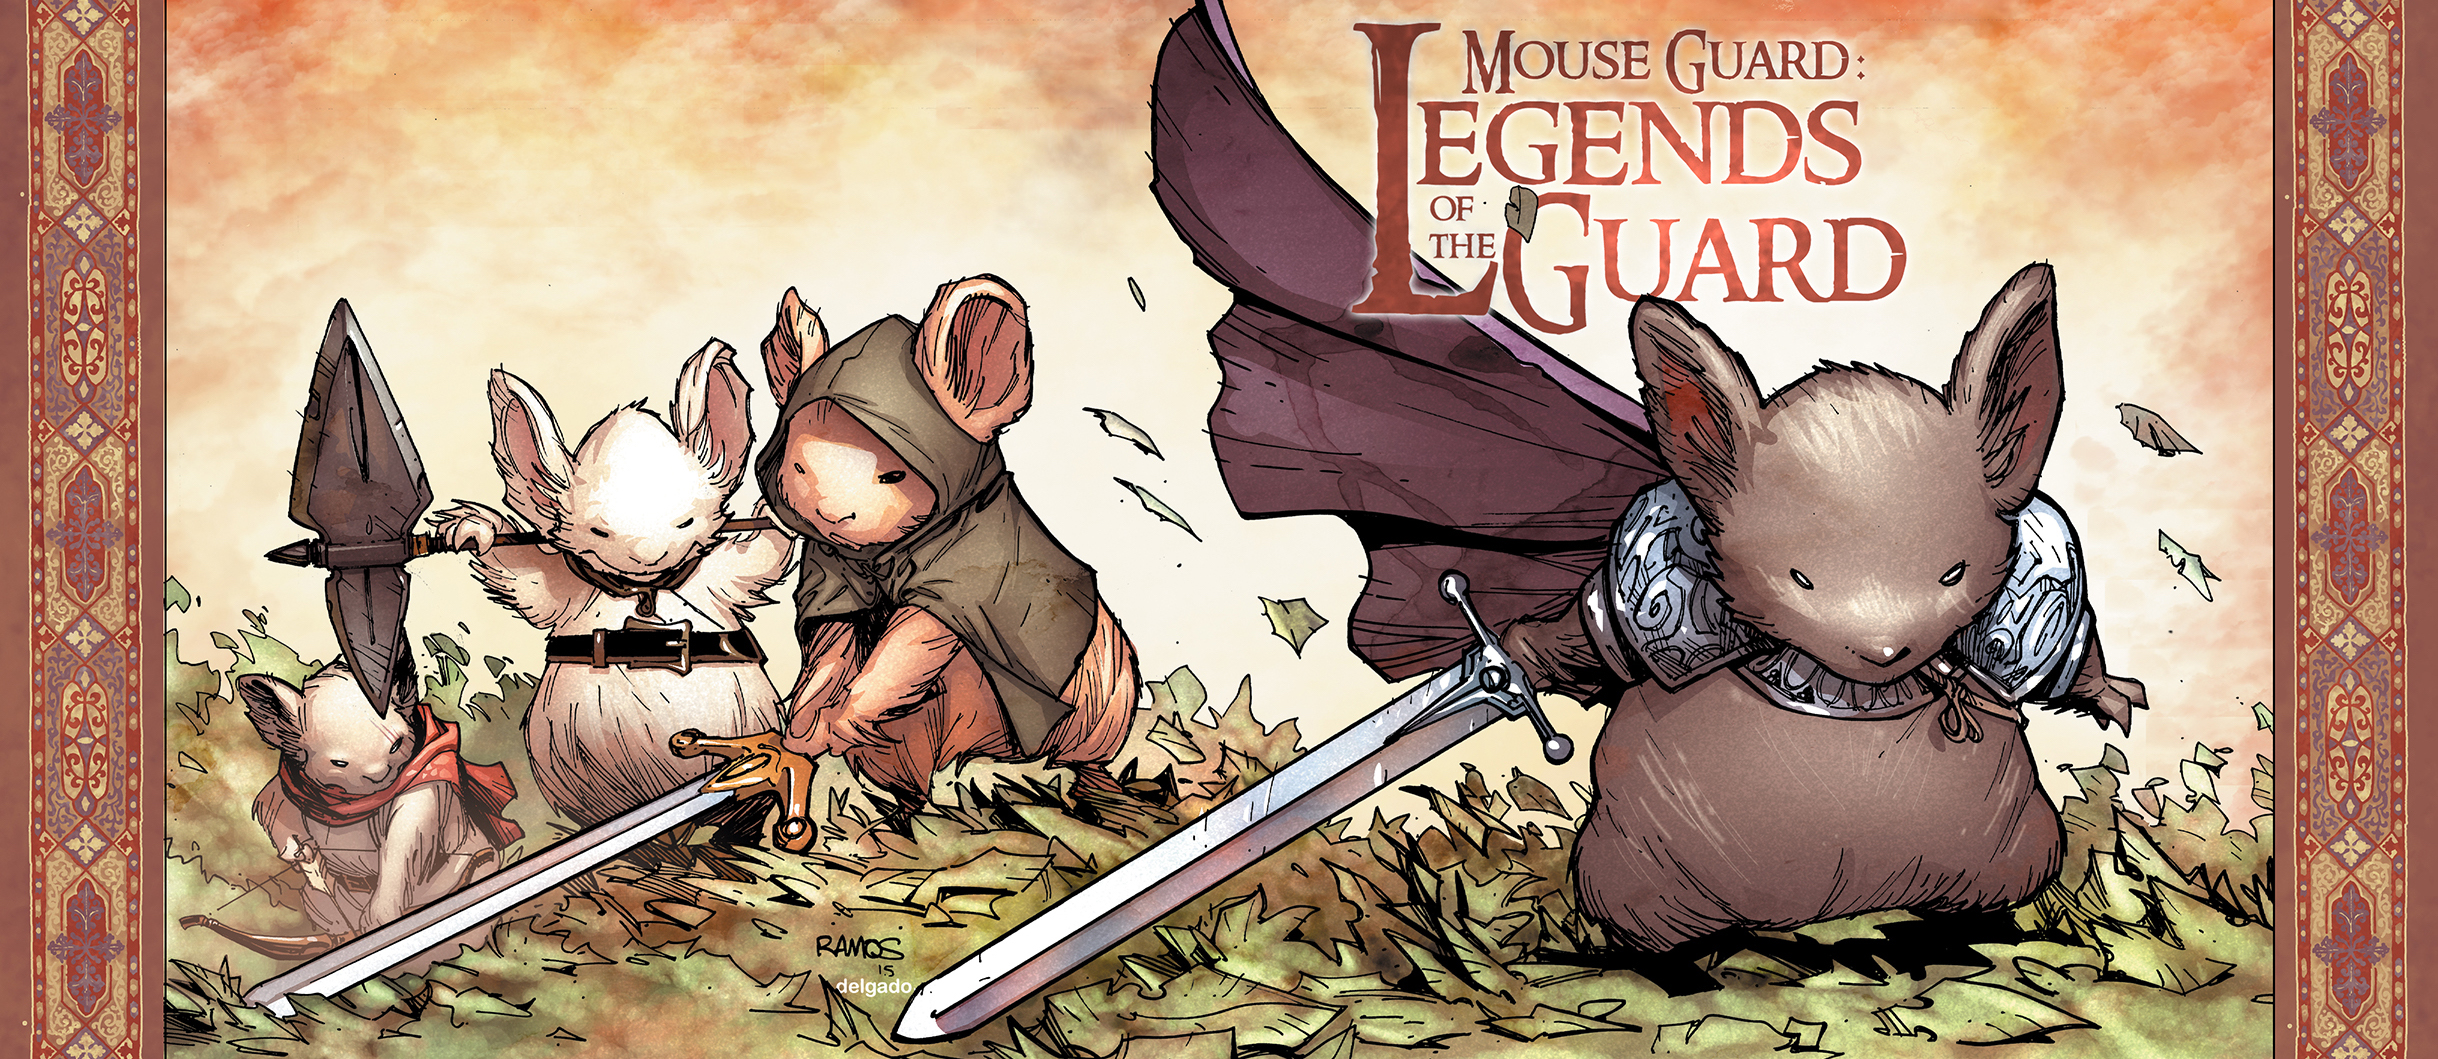 Mouse Guard Movie Coming From Gary Whitta & Matt Reeves2438 x 1059